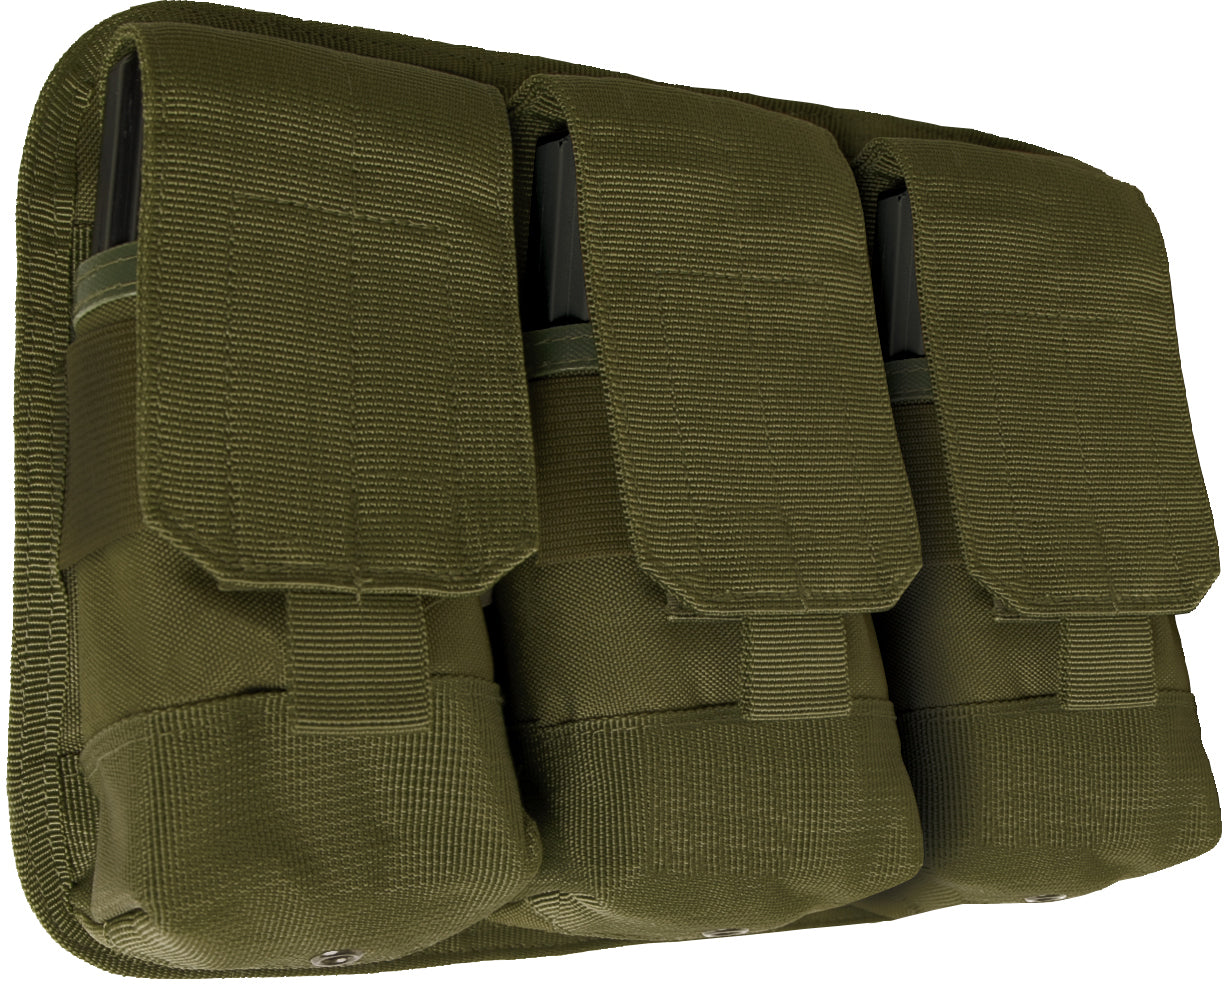 Olive Universal Triple Mag Rifle Pouch